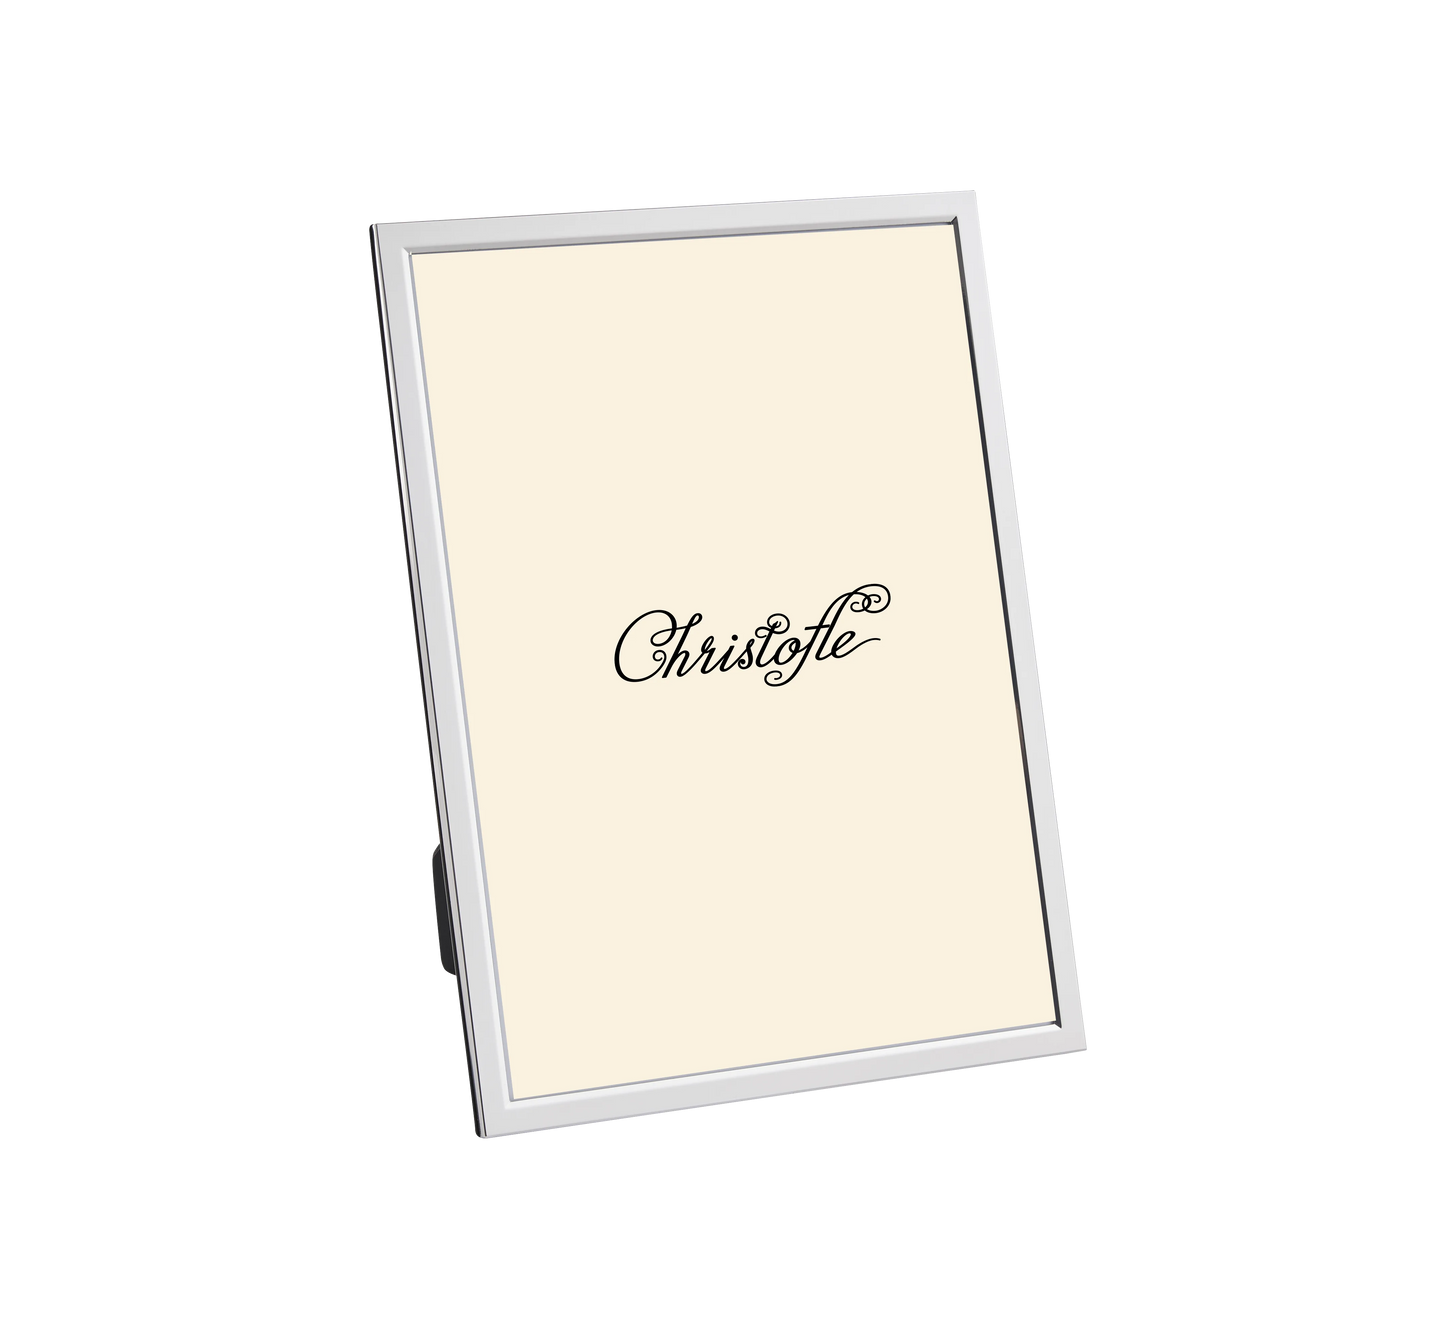 Christofle Uni Picture frame 11.7"x8.25" (29,7x21 cm) Silver plated